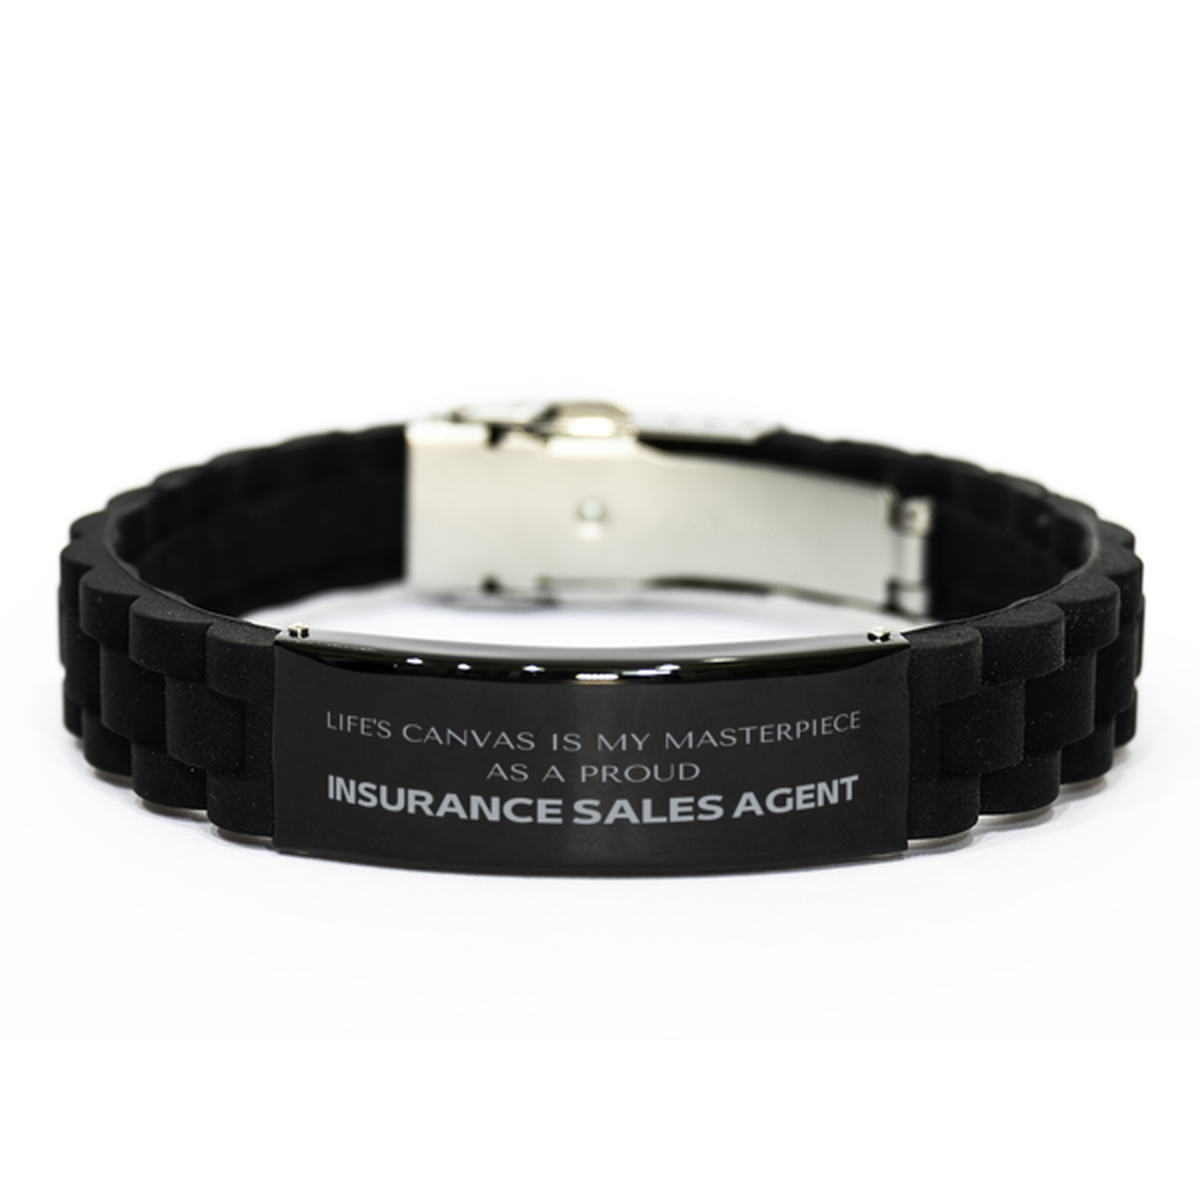 Proud Insurance Sales Agent Gifts, Life's canvas is my masterpiece, Epic Birthday Christmas Unique Black Glidelock Clasp Bracelet For Insurance Sales Agent, Coworkers, Men, Women, Friends